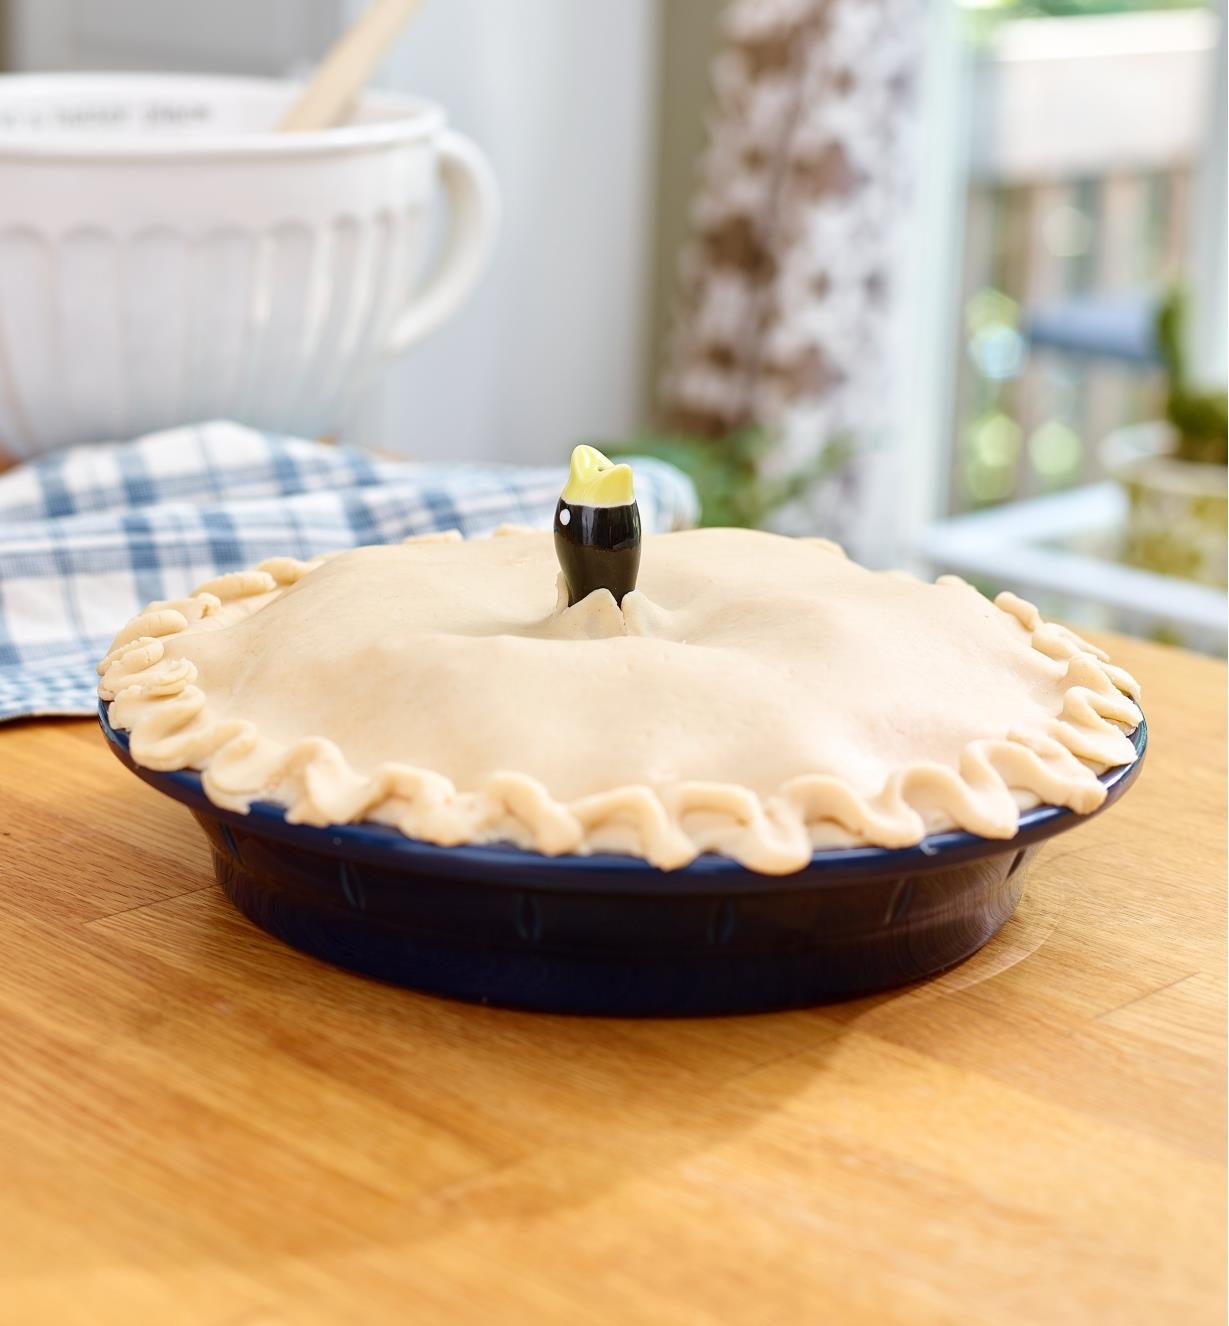 Unbaked pie with the head of the Pie Bird in the center